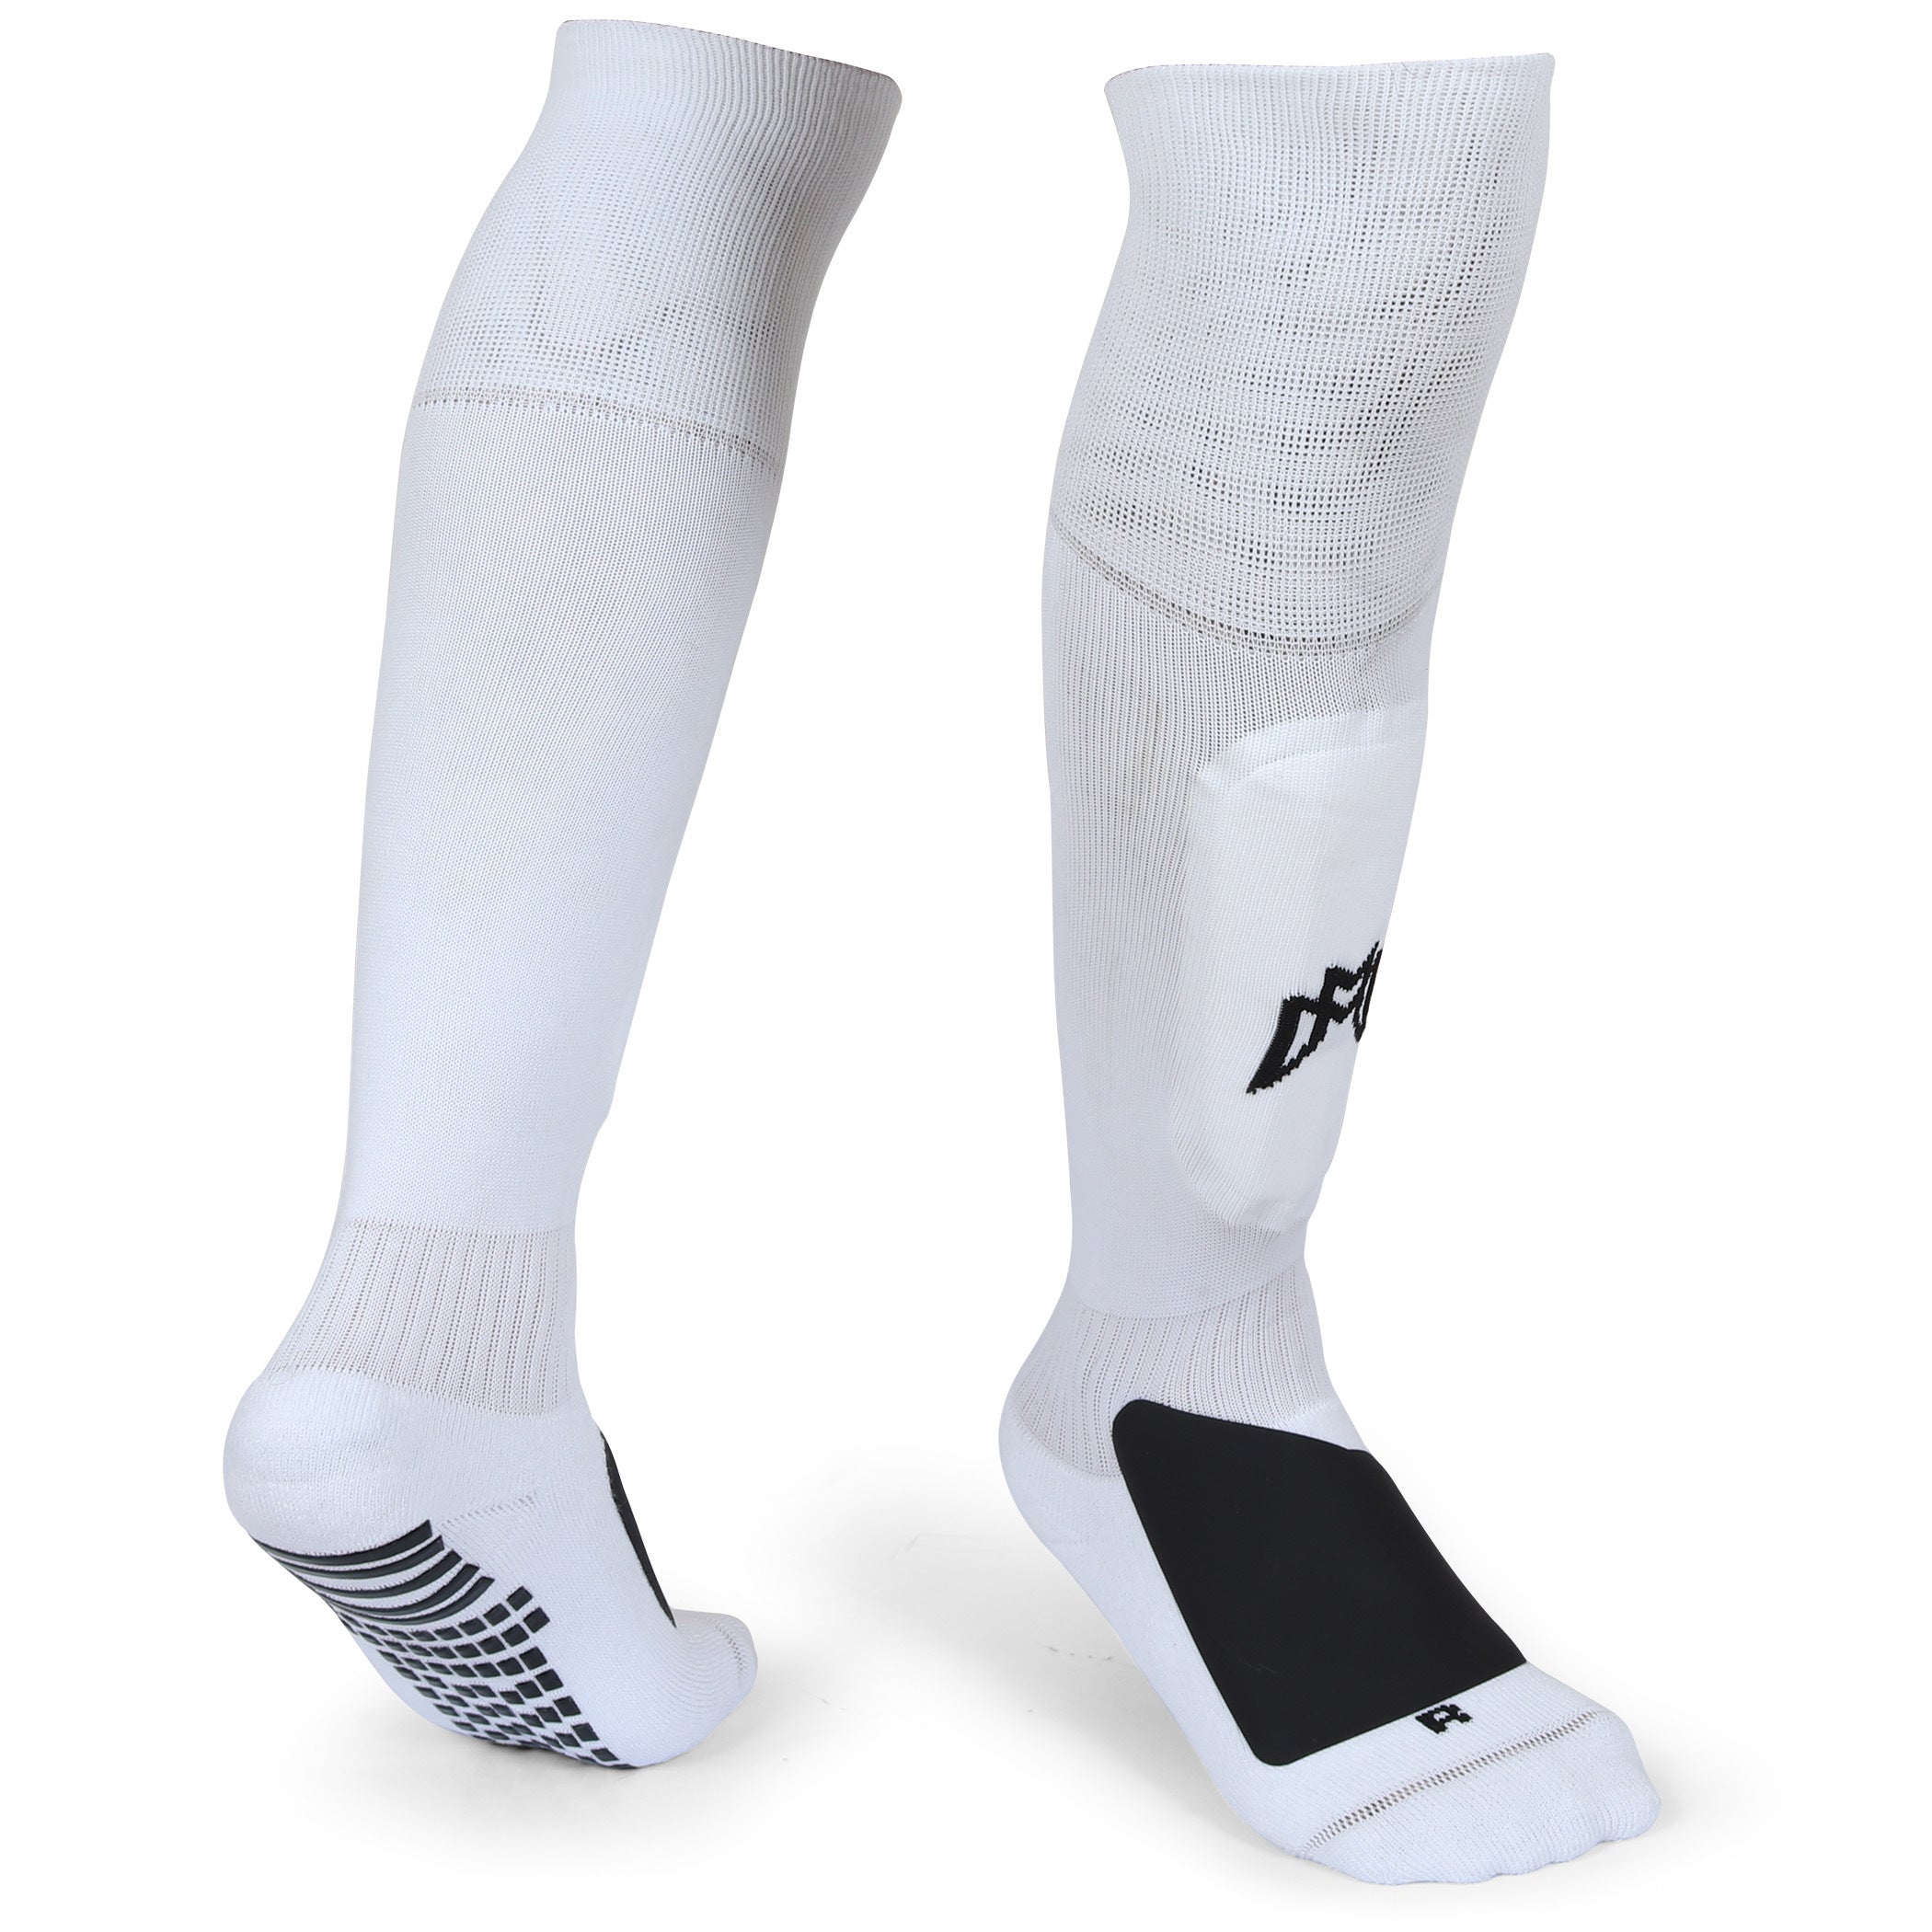 All-in-One Grip Socks with Built in Shin Guards - Full Length White